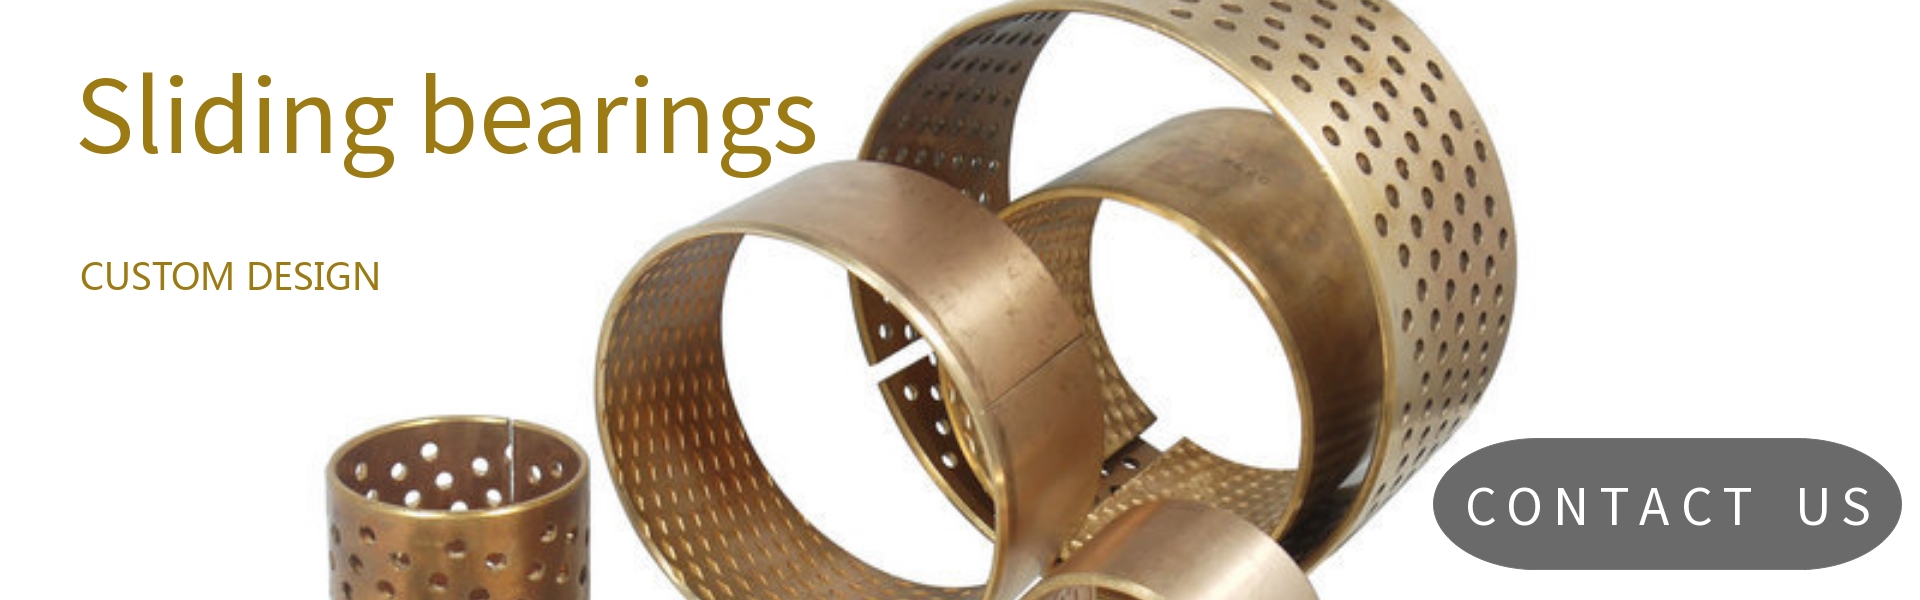 sliding bearings wrapped bronze bushing Material CuSn8 with indented inside surface